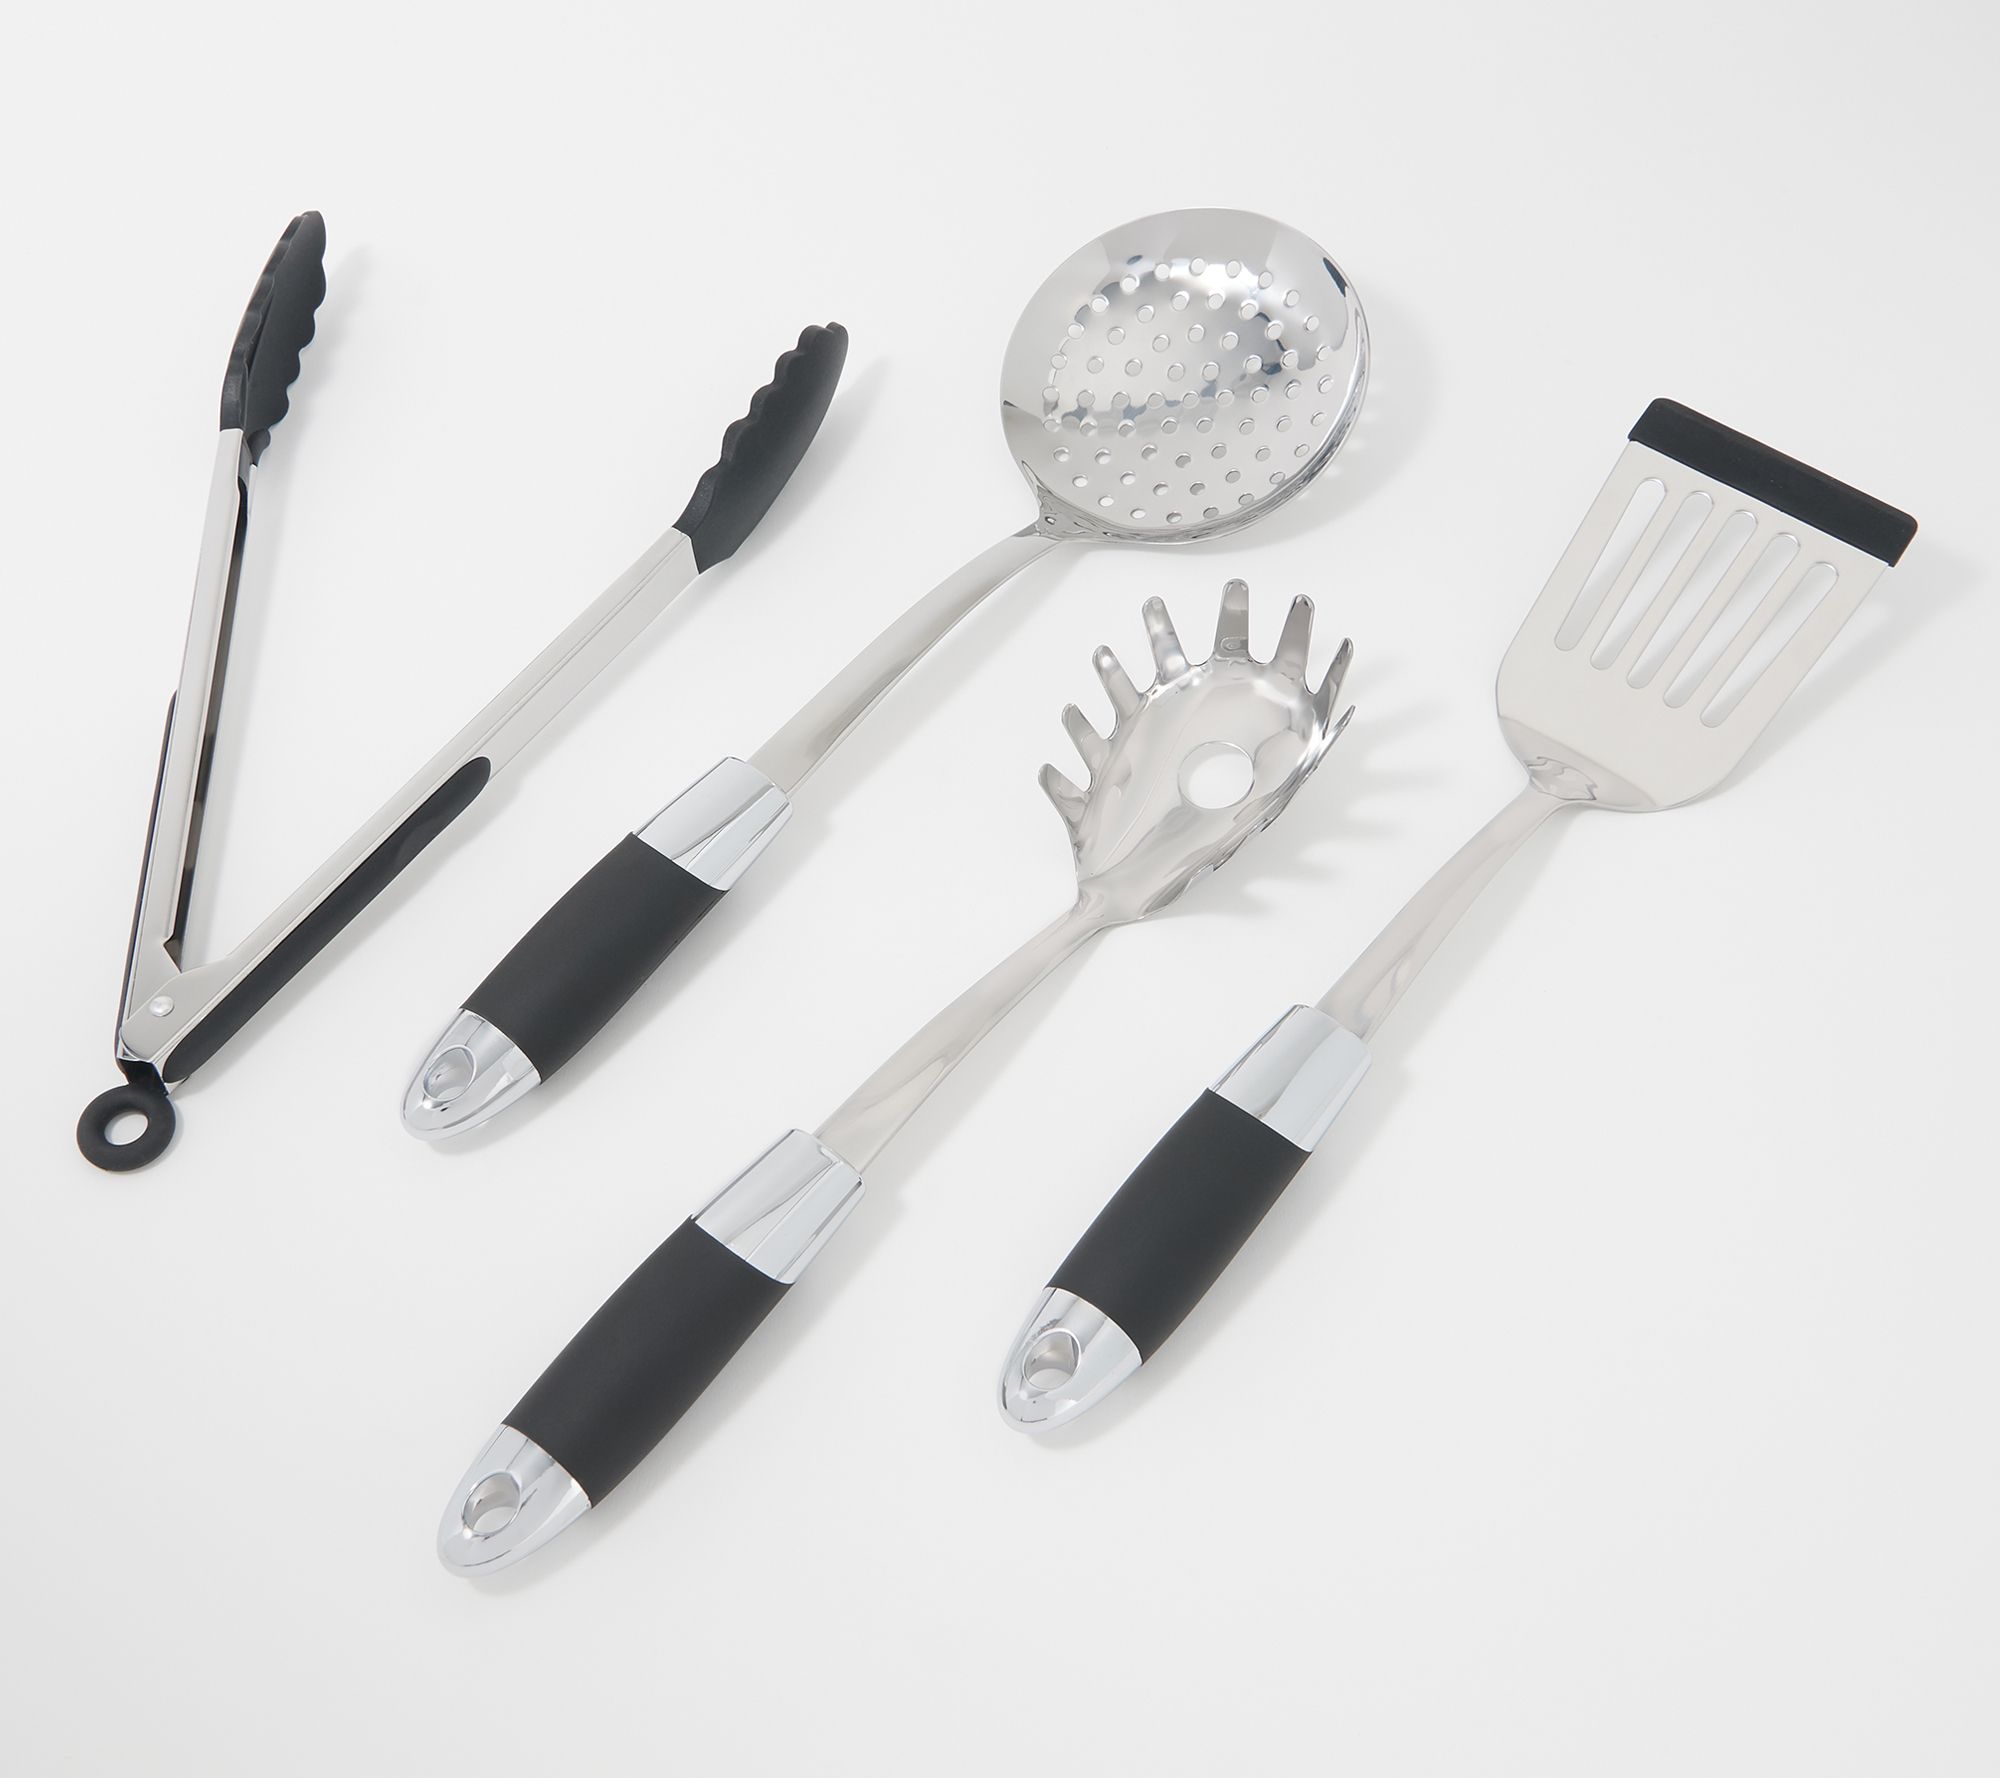 Set of 4 Specialty Stainless Steel Kitchen Utensil Set - QVC.com